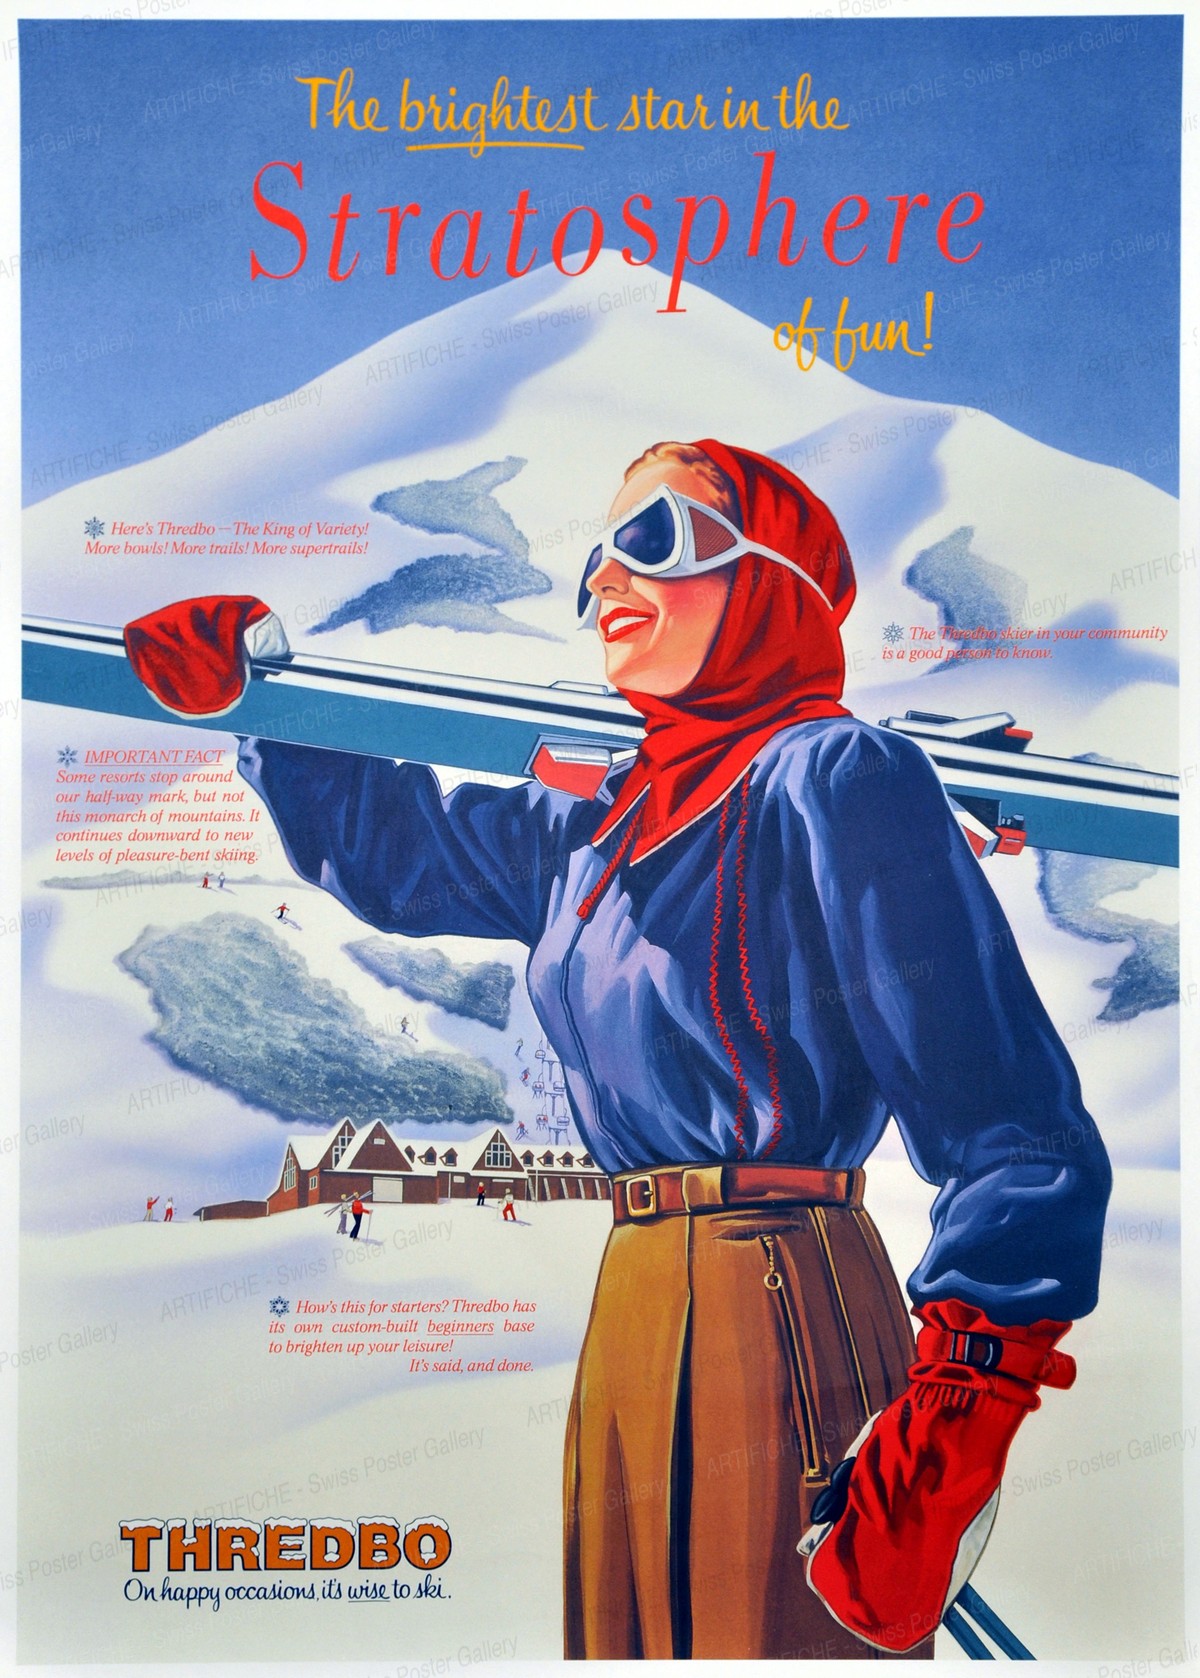 THREDBO – on happy occasions, it’s wise to ski., Artist unknown